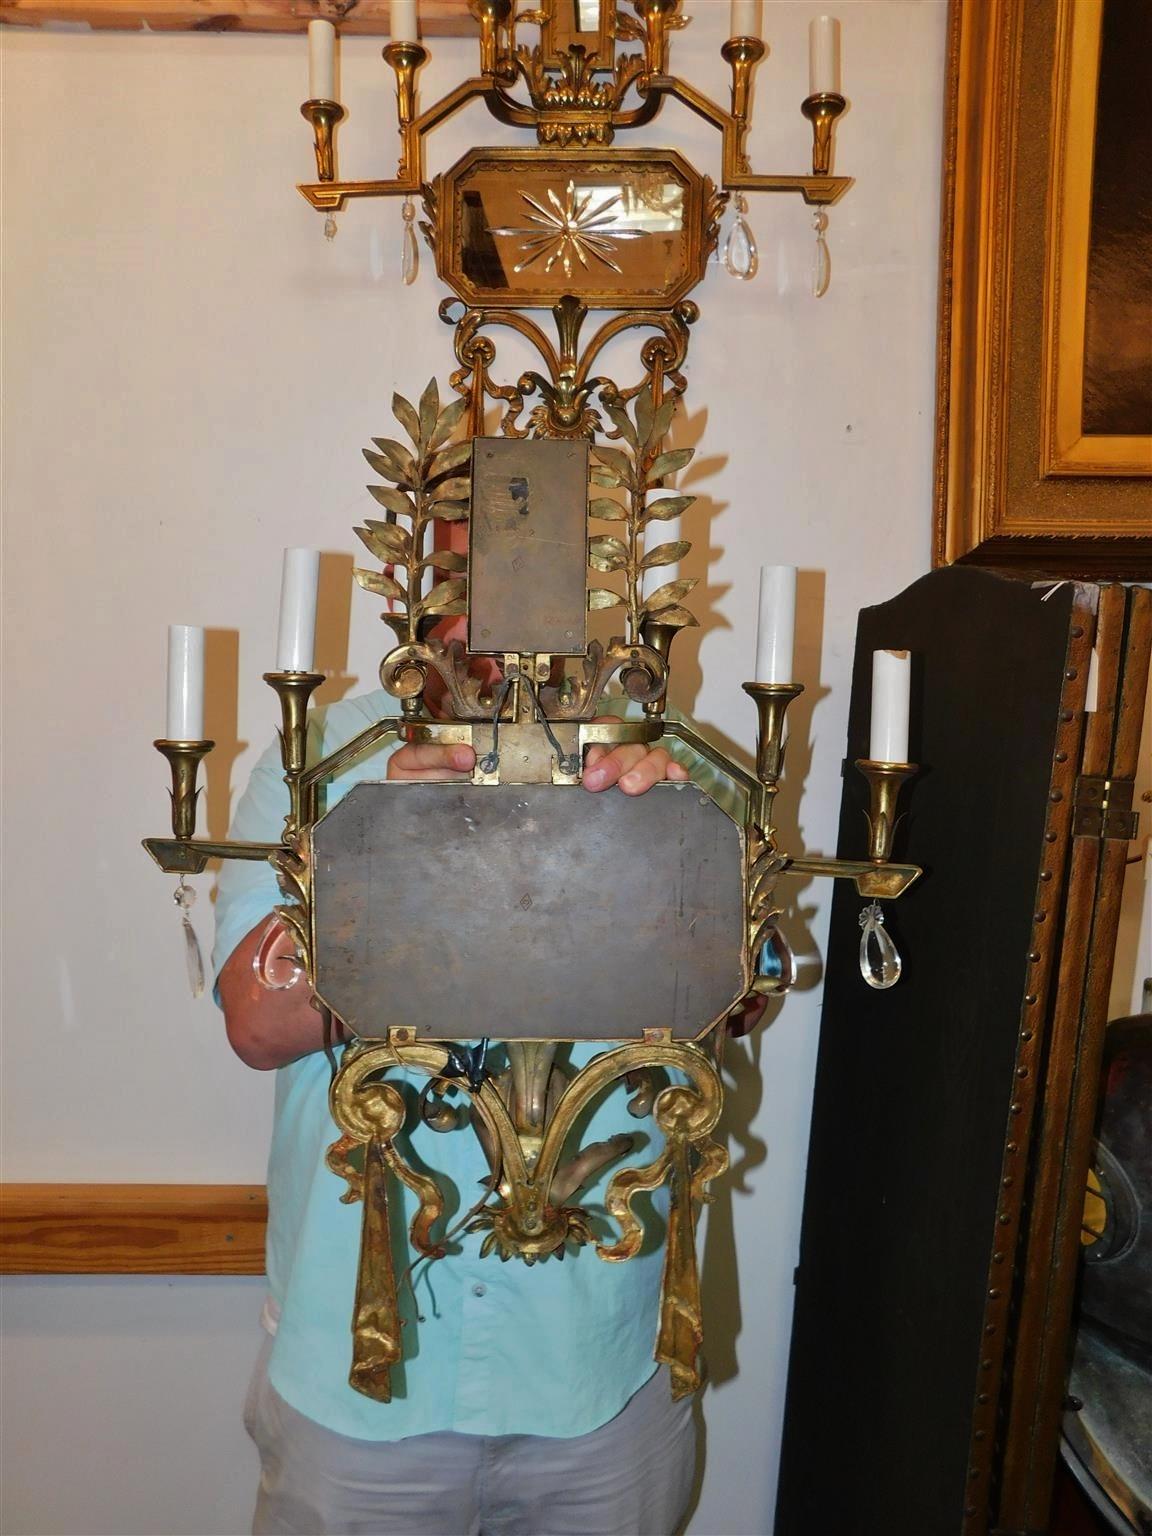 Pair of American Gilt Bronze & Star Mirrored Wall Sconces, Caldwell & Co. C 1870 For Sale 4